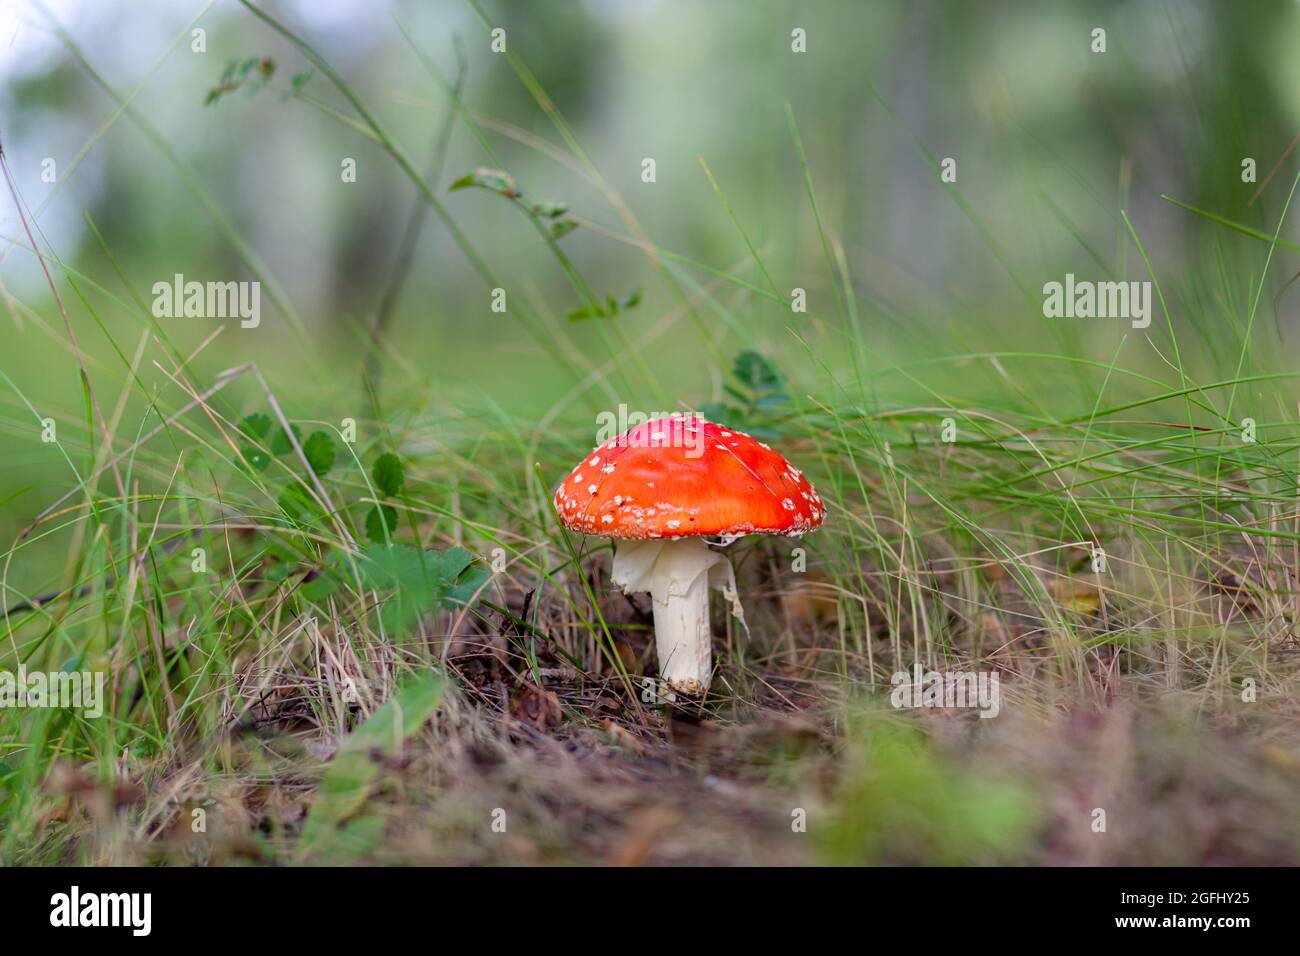 An inedible mushroom is a red fly agaric near a tree close-up.  Stock Photo